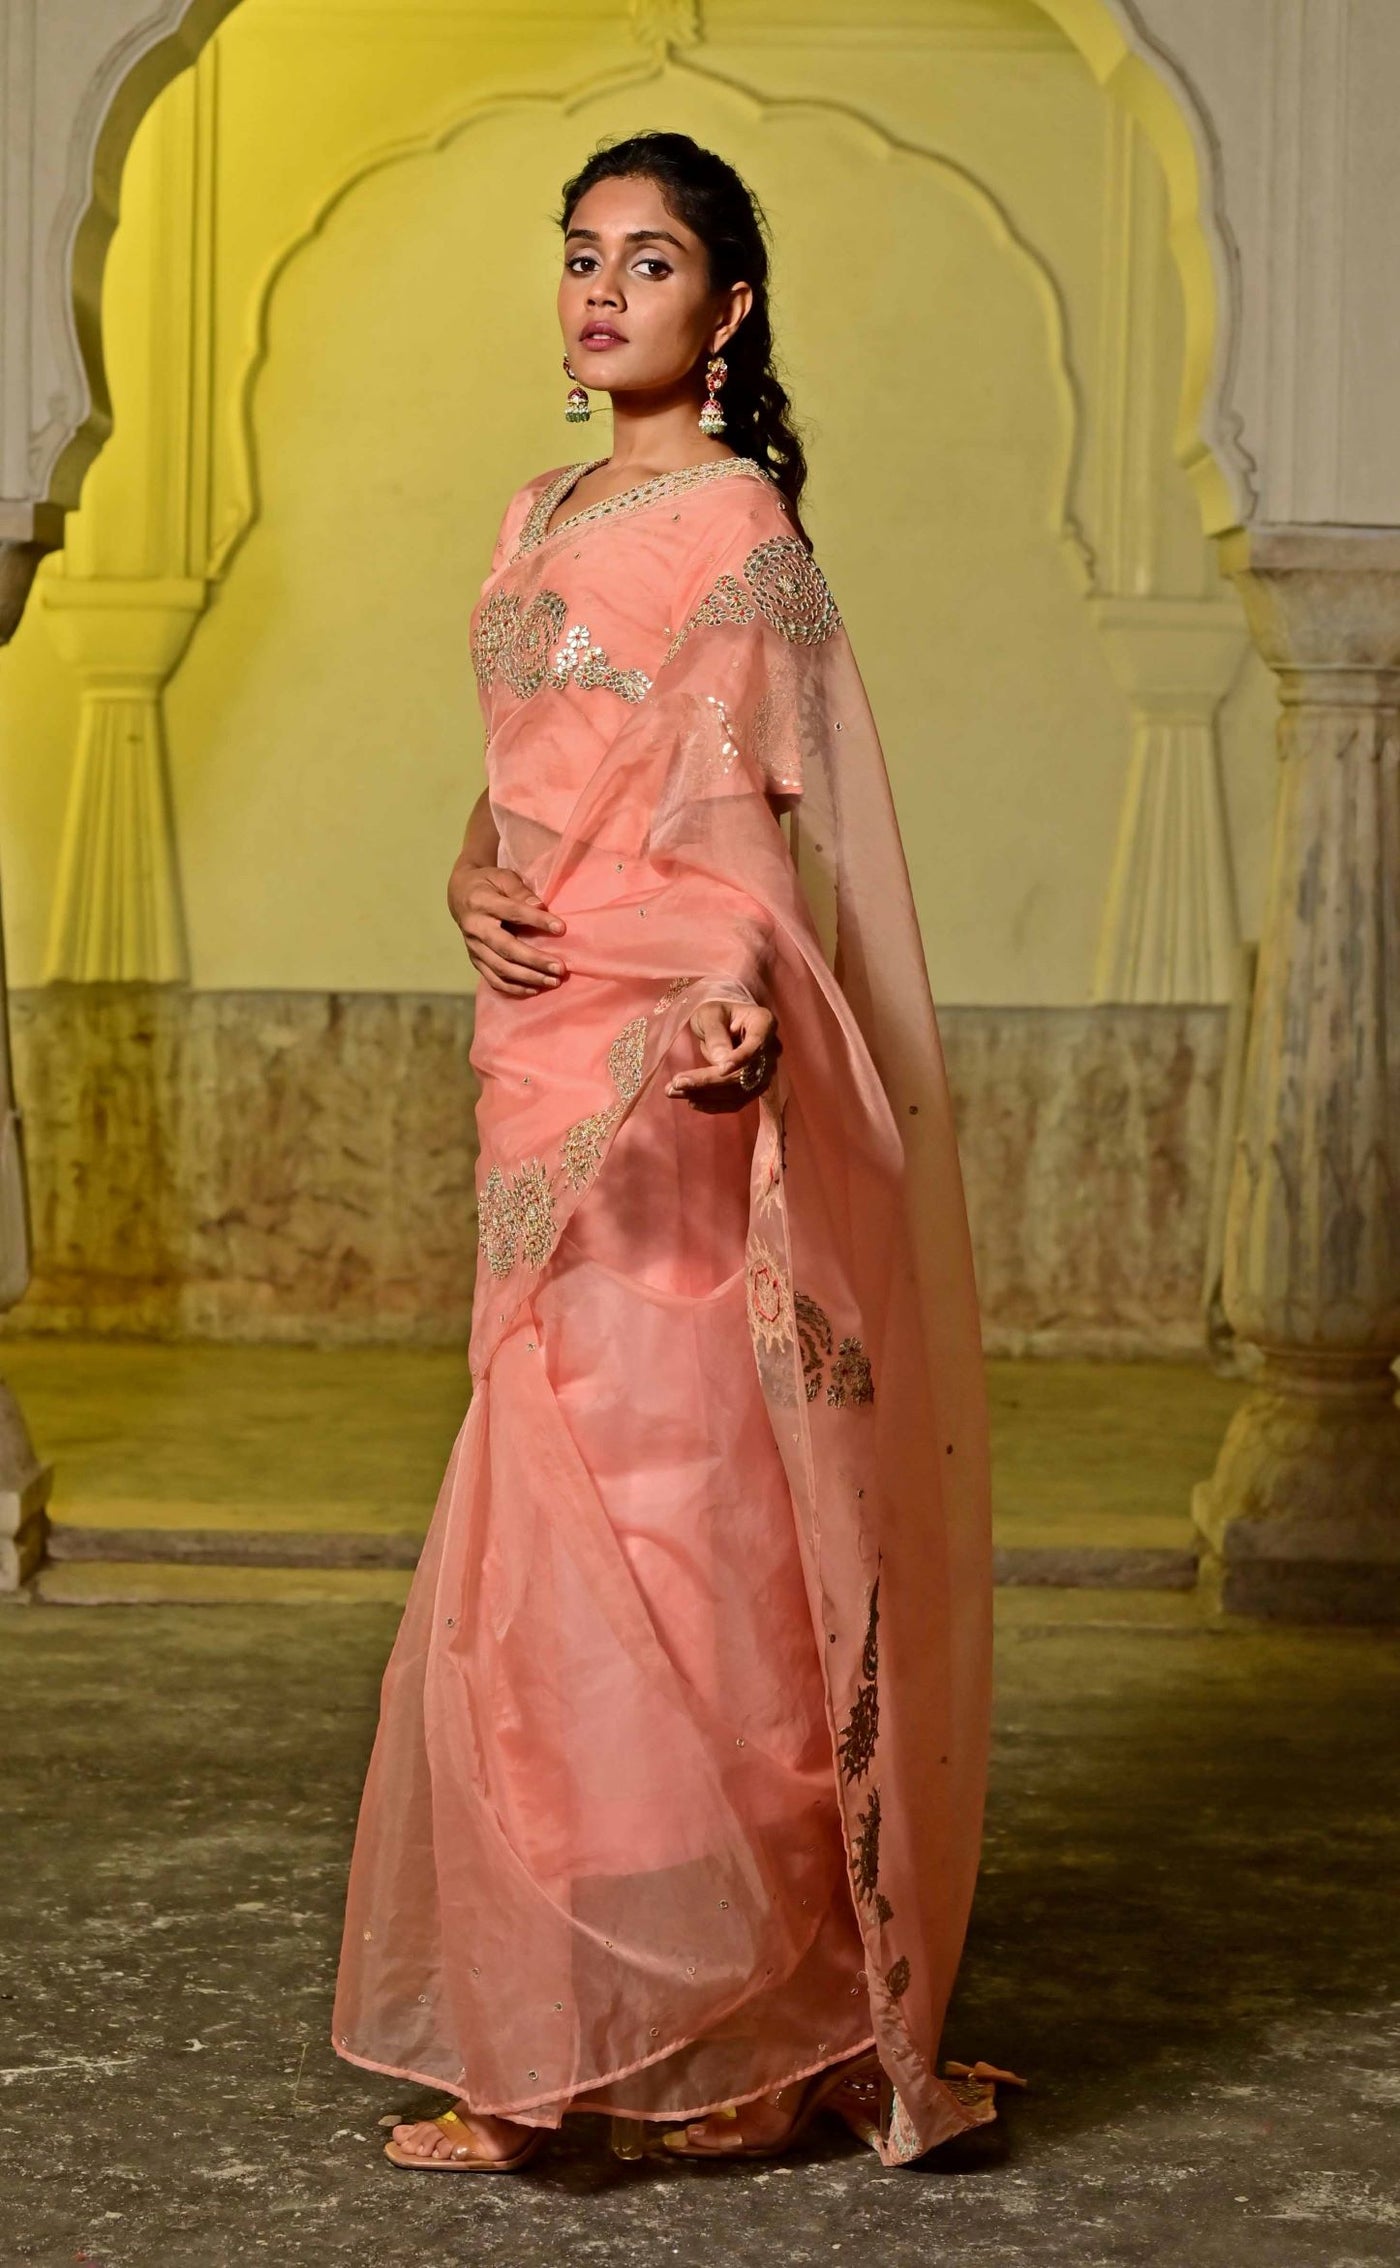 Women's peach organza saree with intricate embroidery for a luxurious look